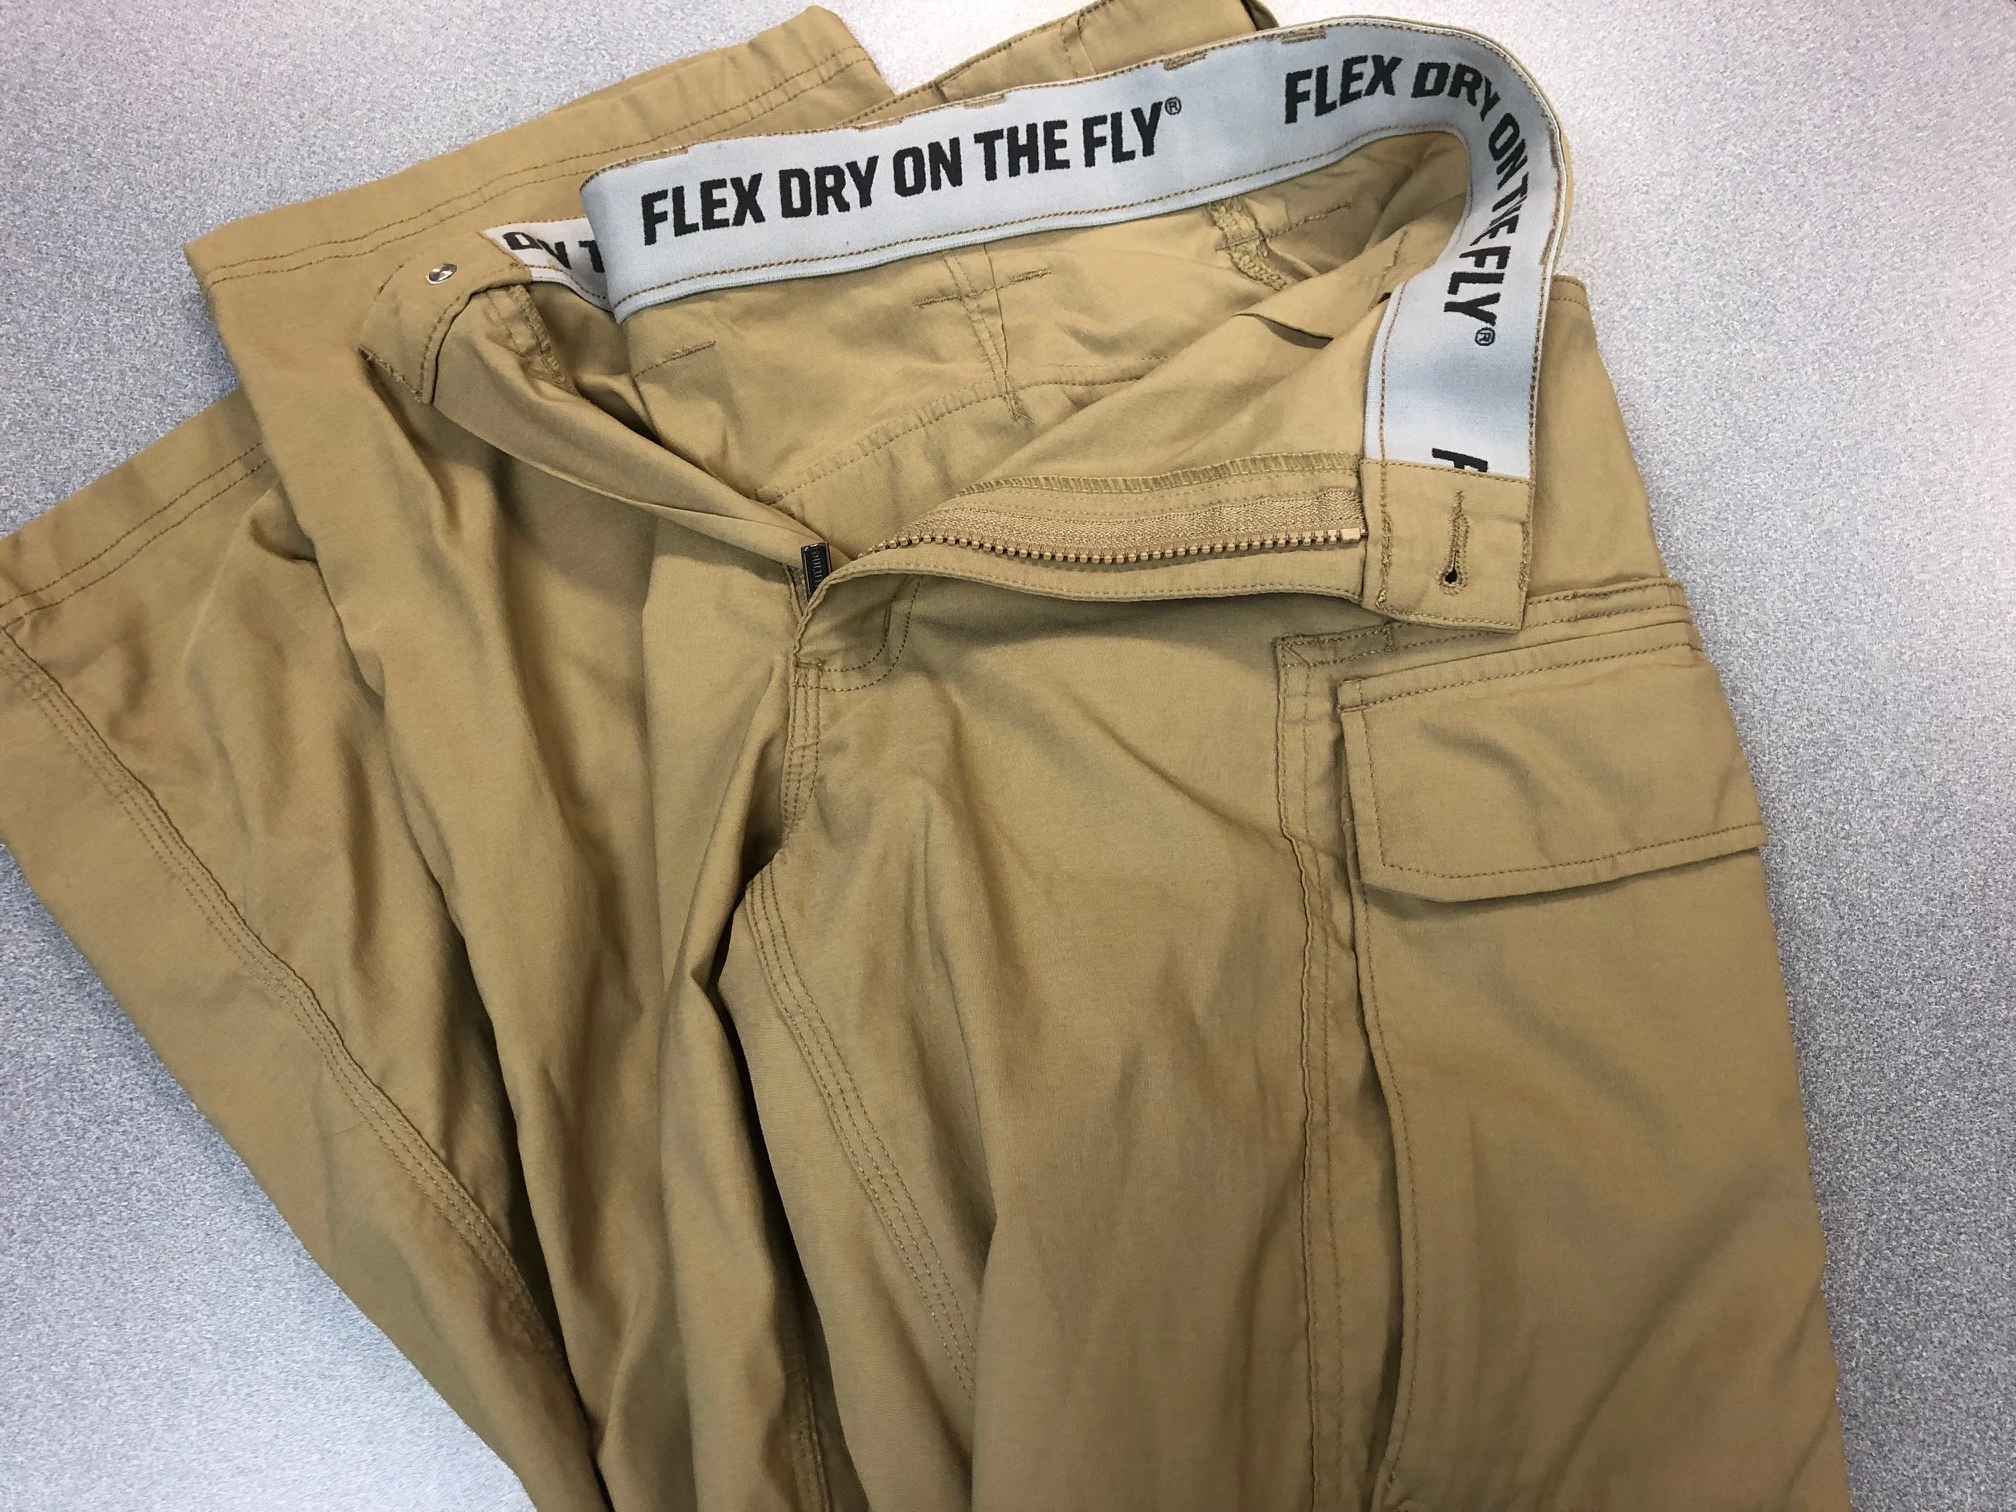 DuluthFlex™ Dry on the Fly® Pants  Duck a dousing and skip the soaking.  Because our fastest-drying, best-flexing pants are priced to move right  now. But don't take our word for it.